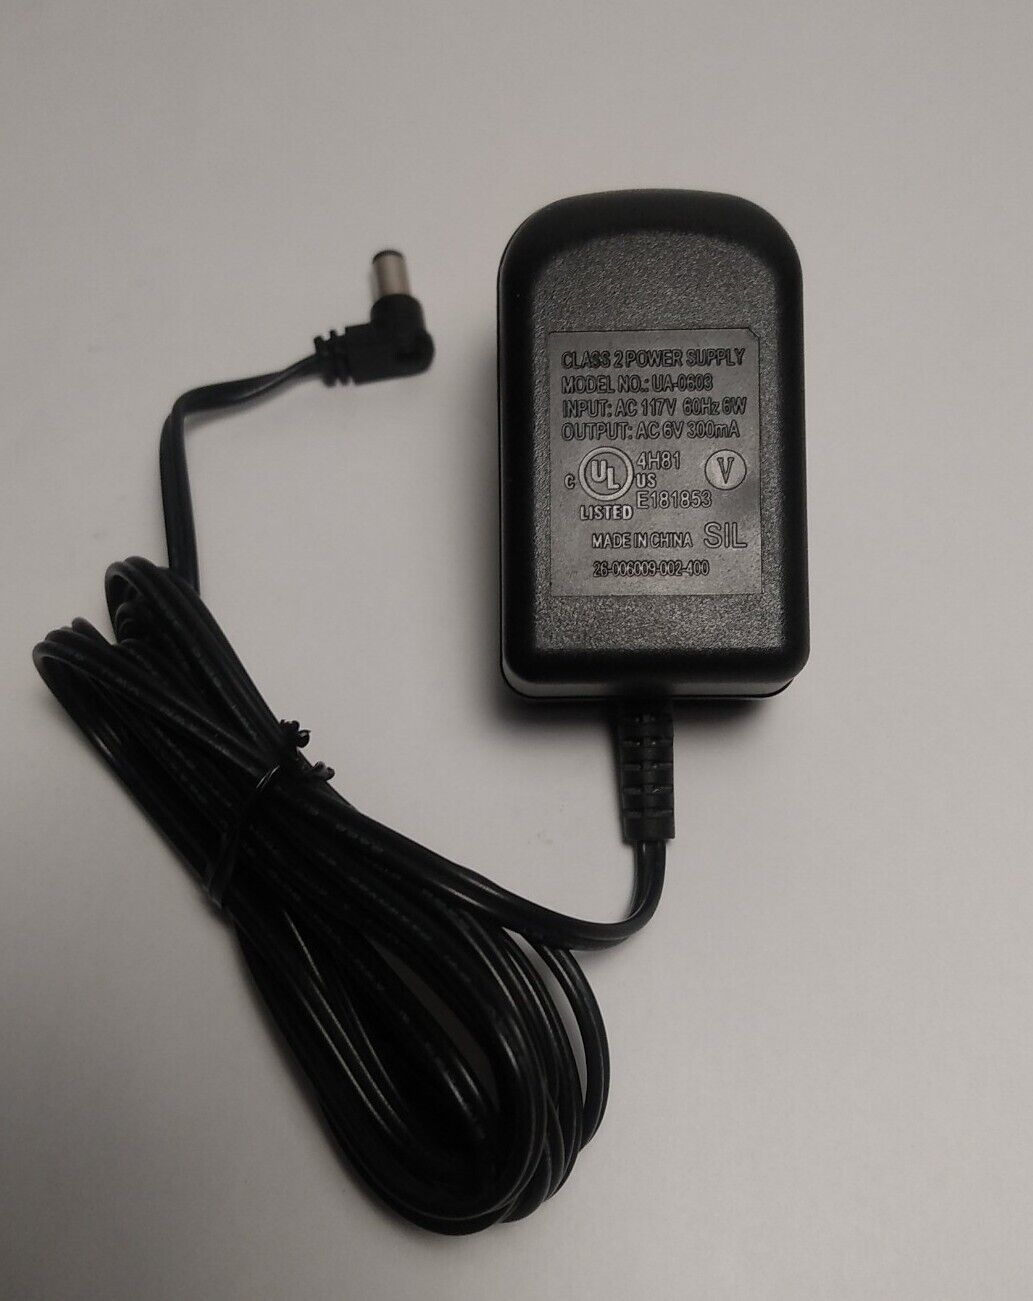 SIL Class 2 Power Supply For Motorola Charging Dock L603M UA-0603 AC 6V 300mA Brand: SIL Compatible Brand: For Motoro